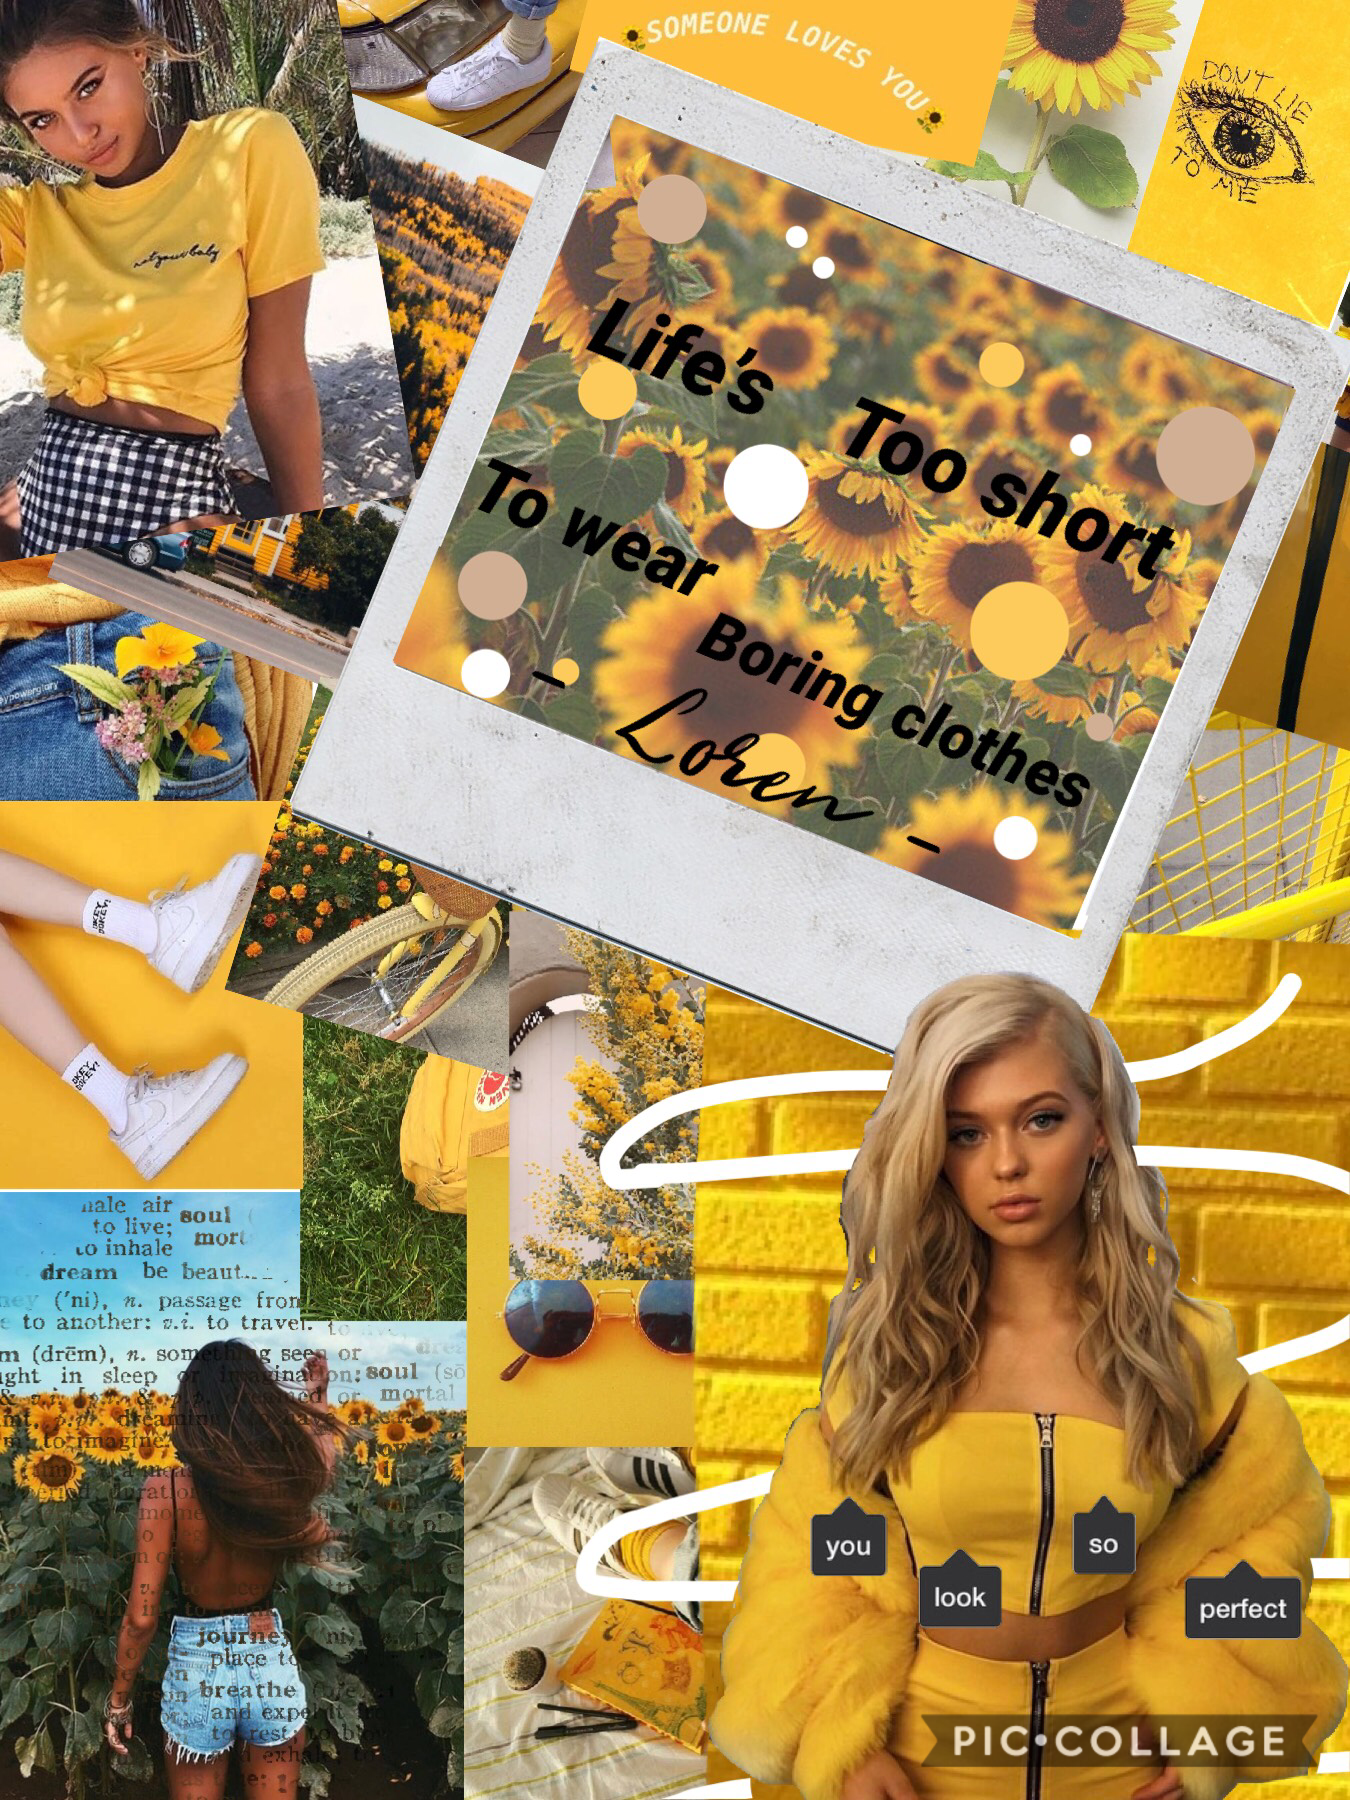 Last yellow collage of the week!
Later I will post this weeks color
☀️💛🍯🍋🌻

Lusm💕🌊